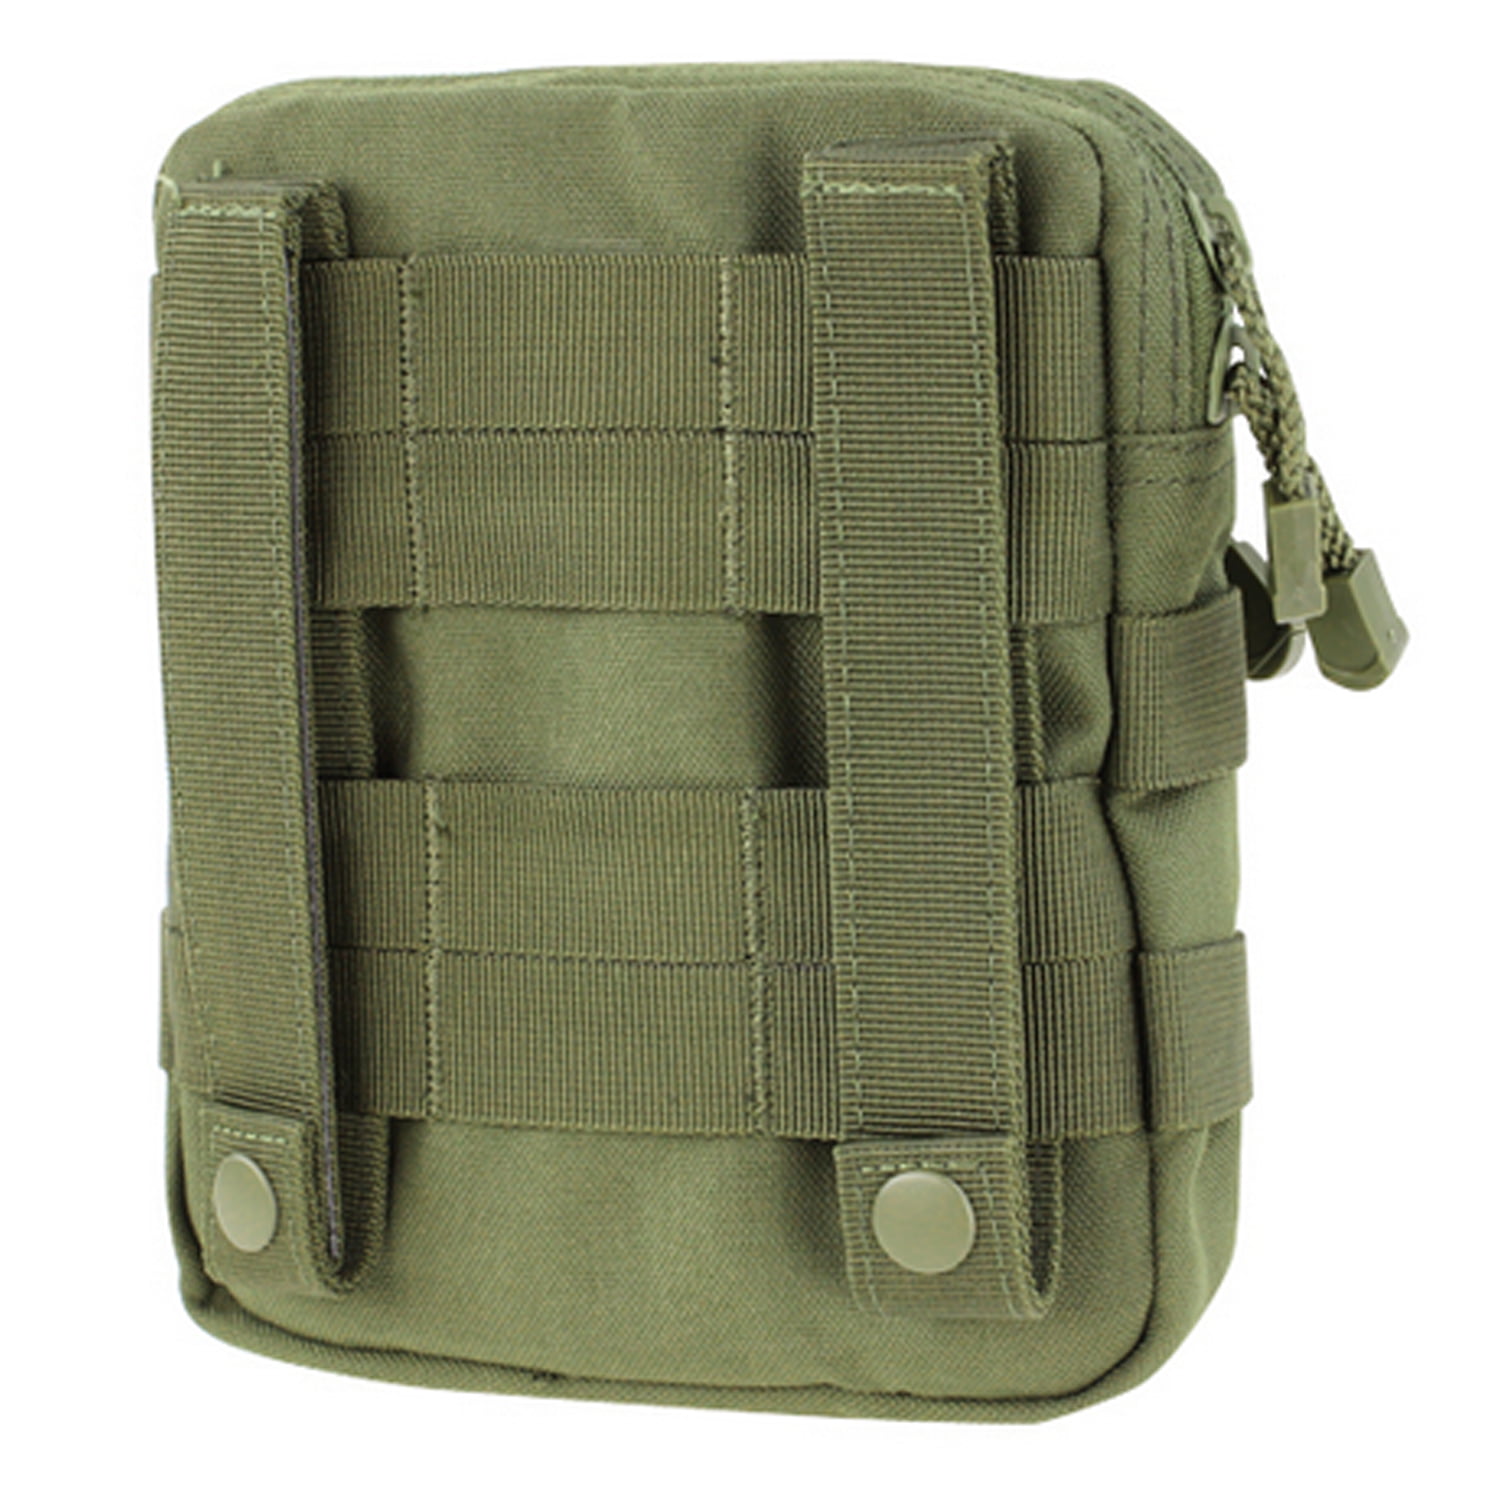 Condor G.P Tactical Tool Pouch OD Green gear mag clip #MA67 Molle pack 